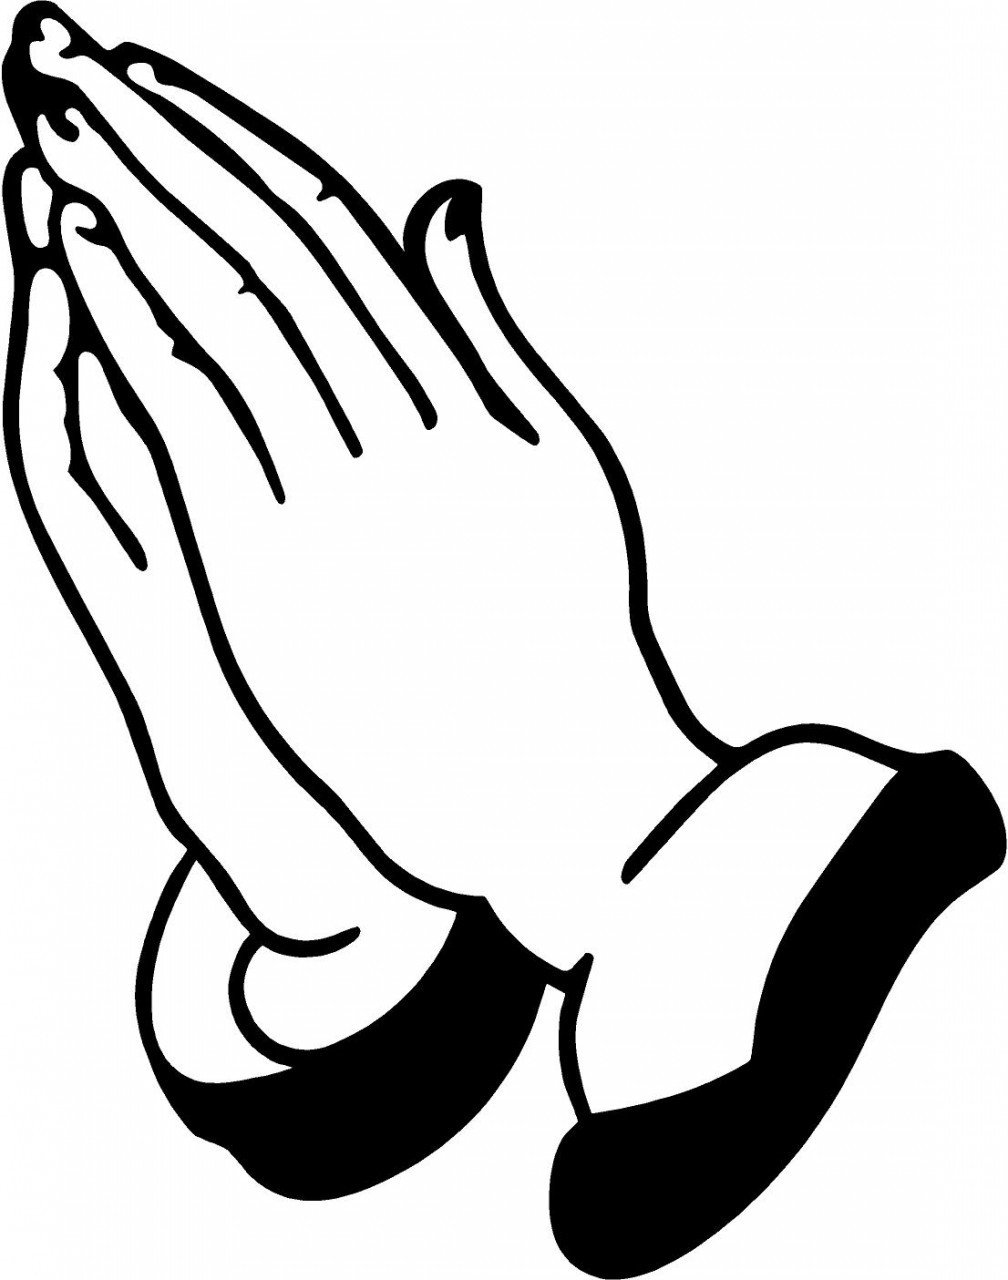 Praying hands clipart black and white - ClipartFox